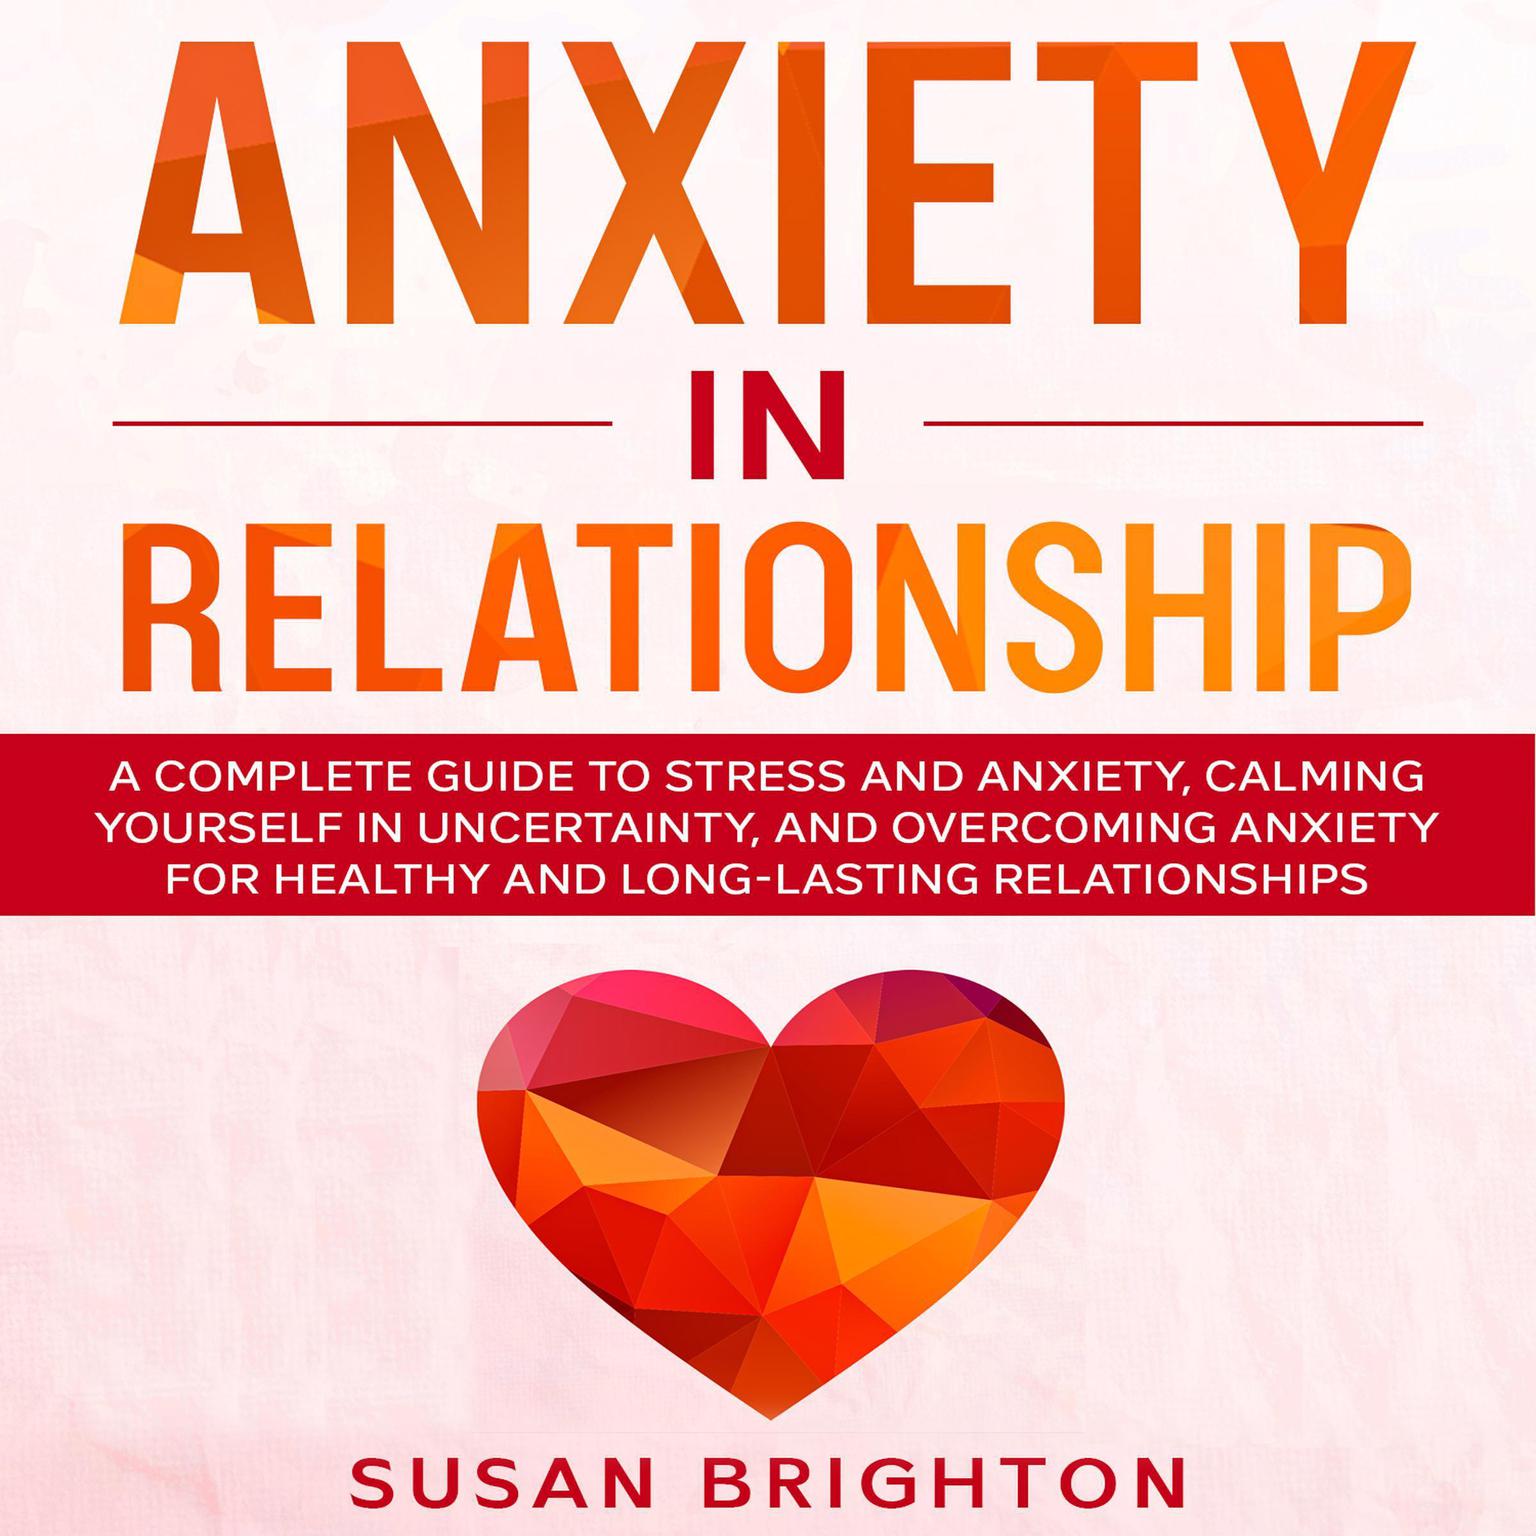 Anxiety in Relationship: A Complete Guide to Stress and Anxiety, Calming Yourself in Uncertainty, and Overcoming Anxiety for Healthy and Long-Lasting Relationships: A Complete Guide to Stress and Anxiety, Calming Yourself in Uncertainty, and Overcoming Anxiety for Healthy and Long-Lasting Relationships Audiobook, by Susan Brighton